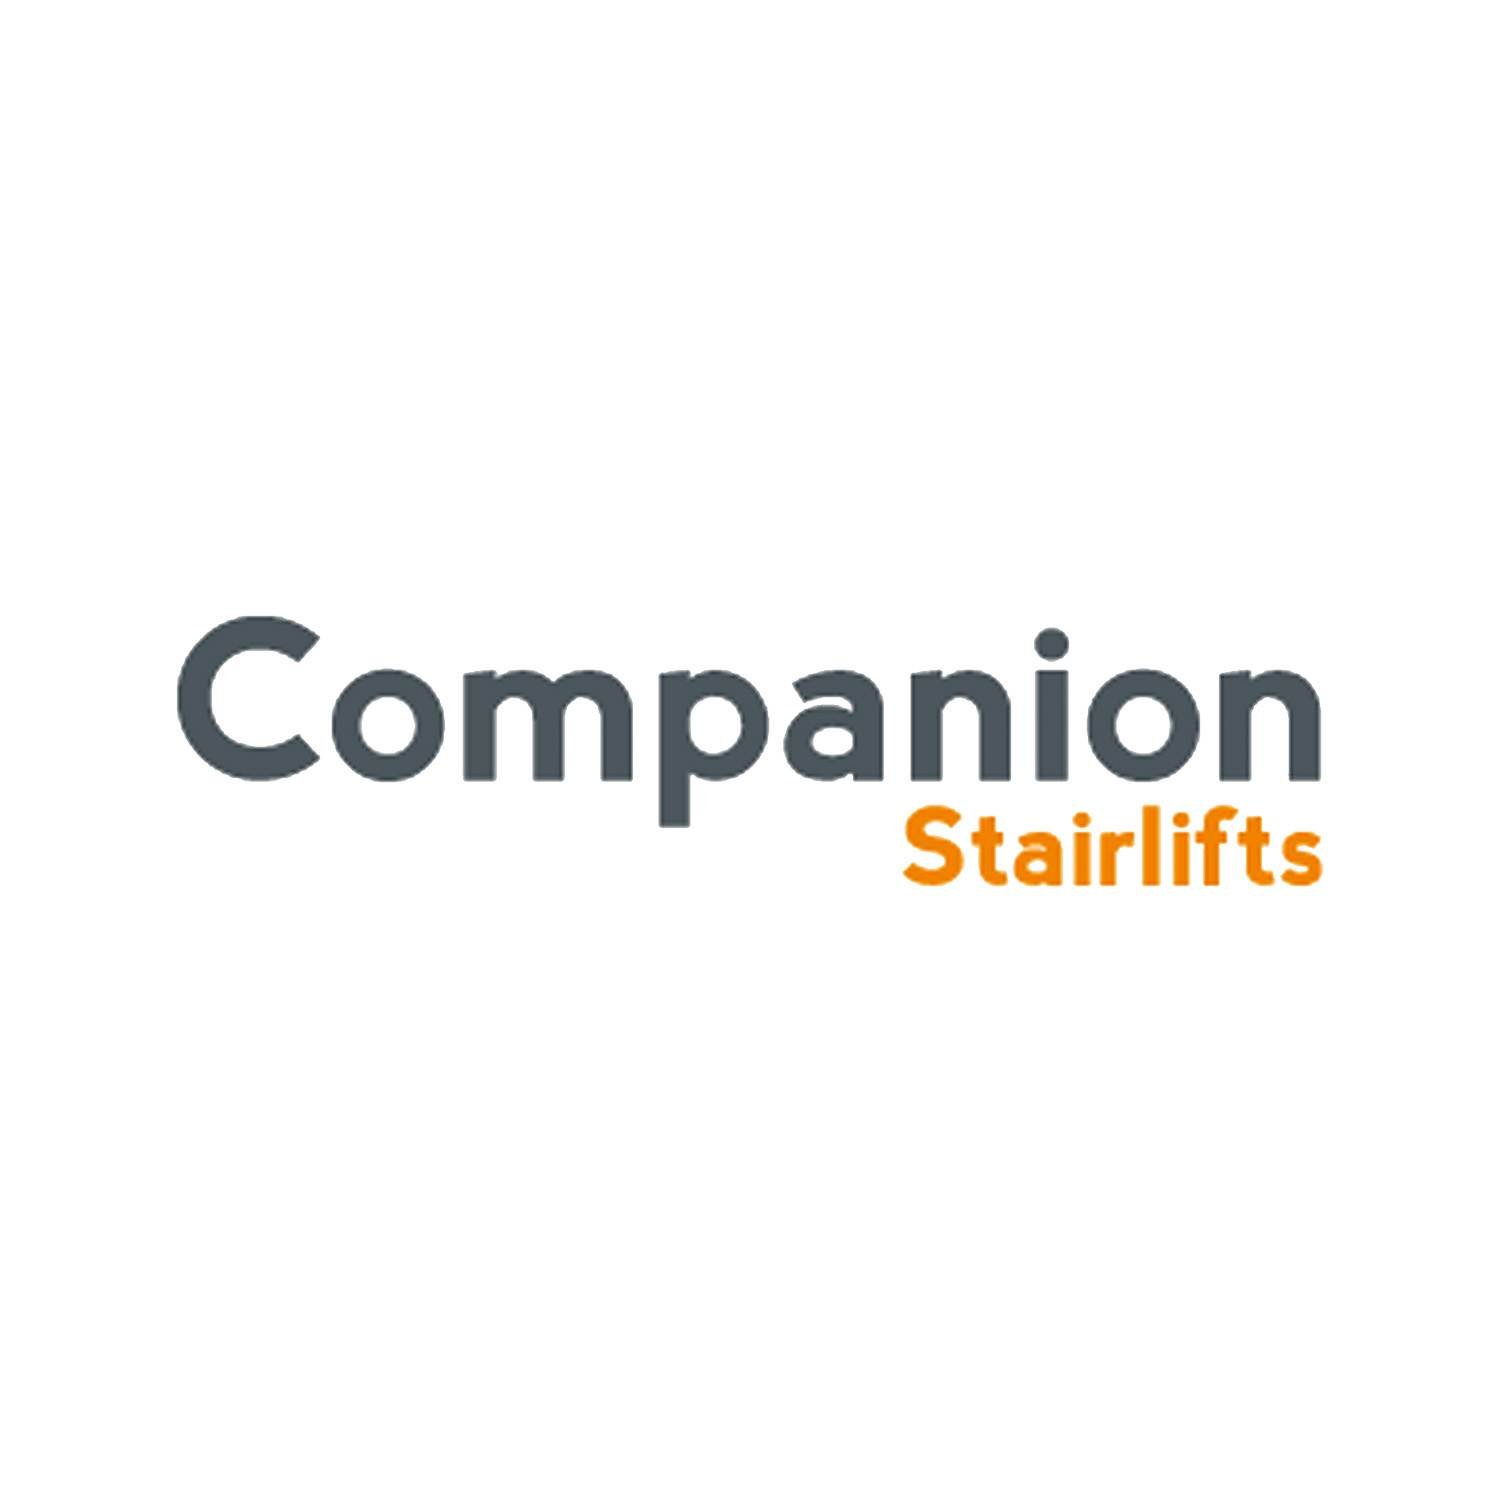 companionstairlifts